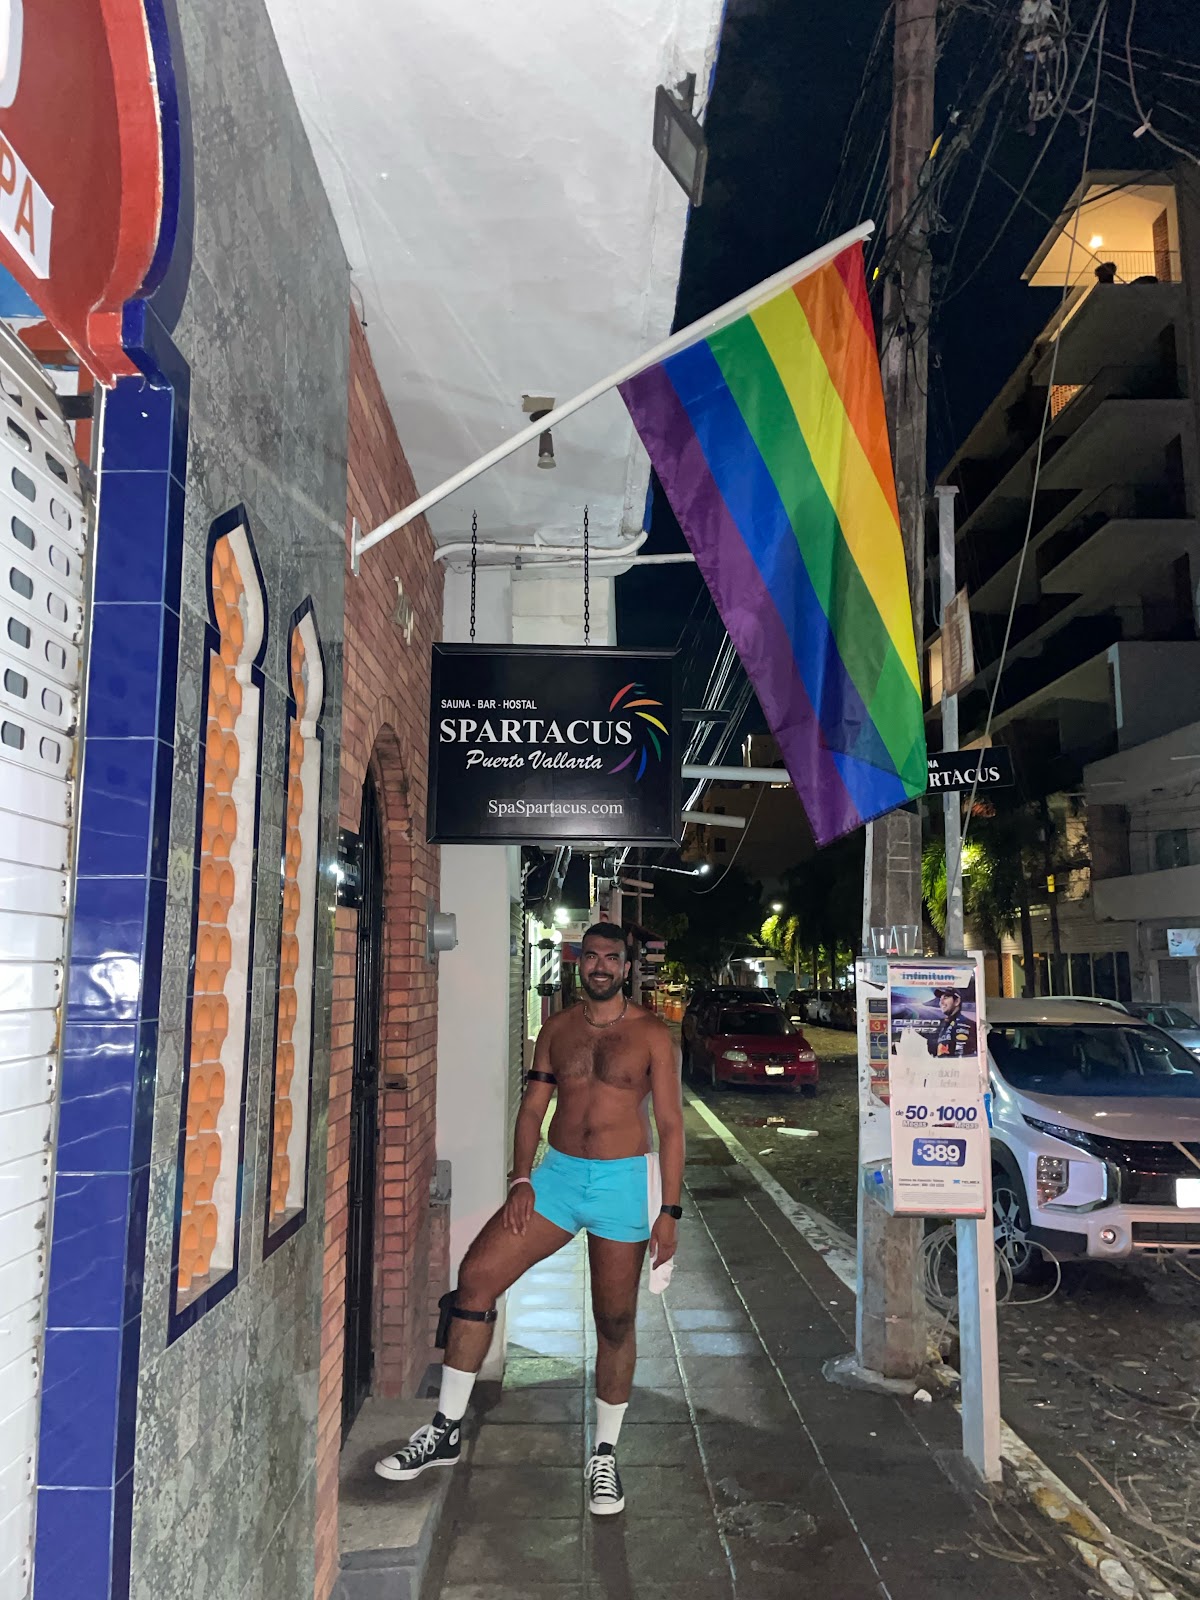 gay male shirtless standing in puerto vallarta streets wearing baby blue shorts standing outside of the spartacus gay male bathhouse for fucking